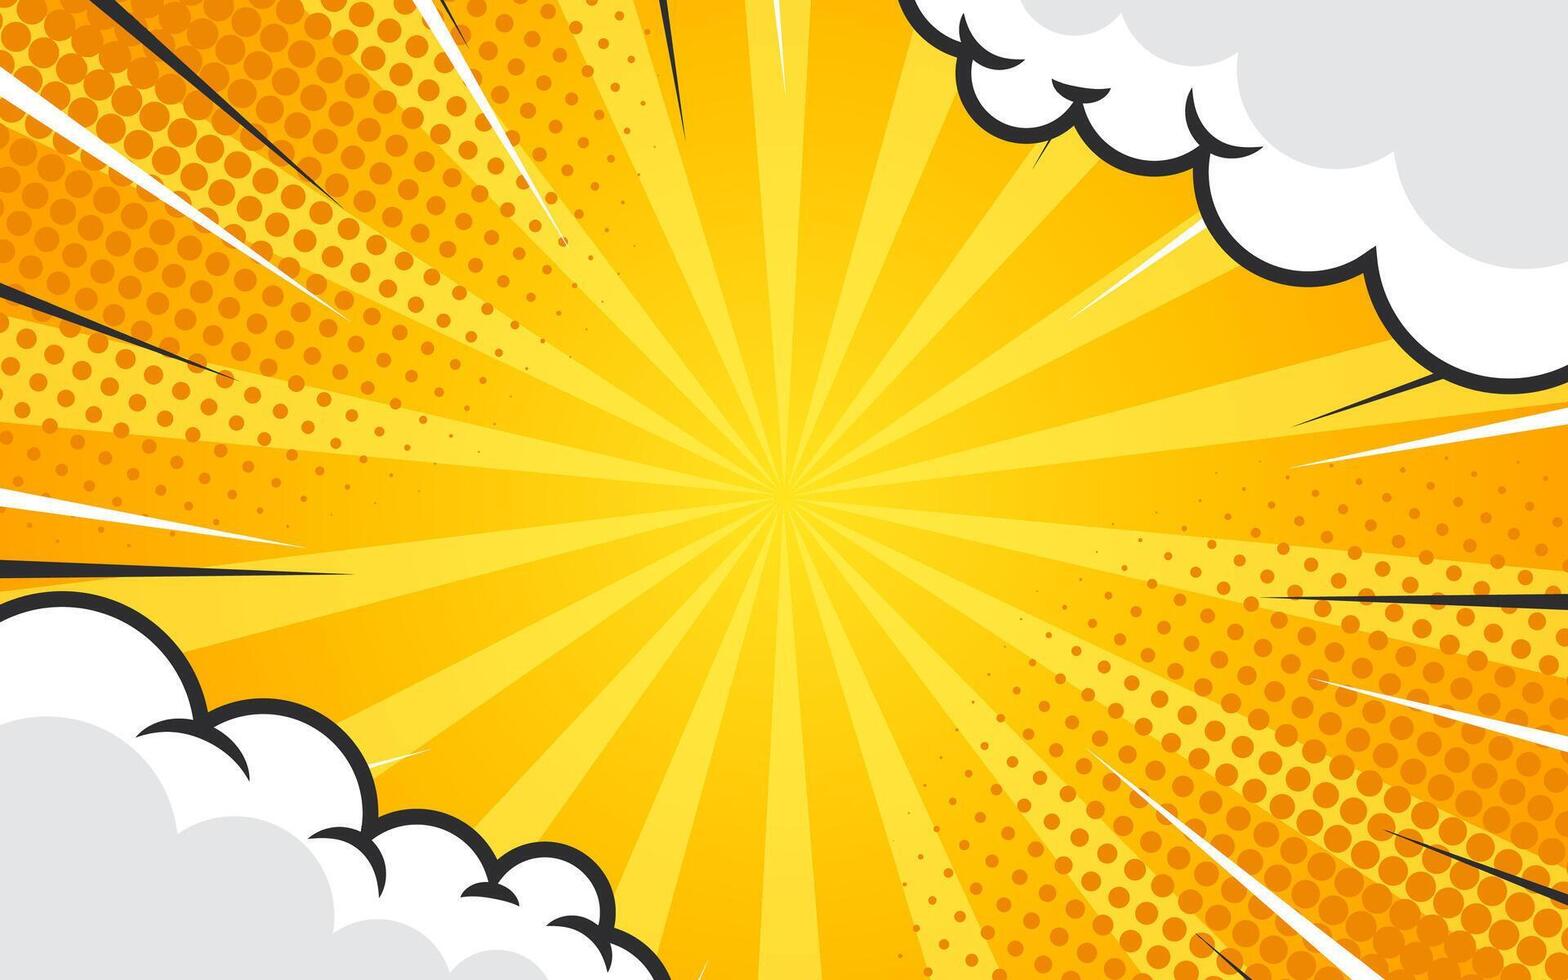 Pop art comic background with halftone colors and cute clouds vector